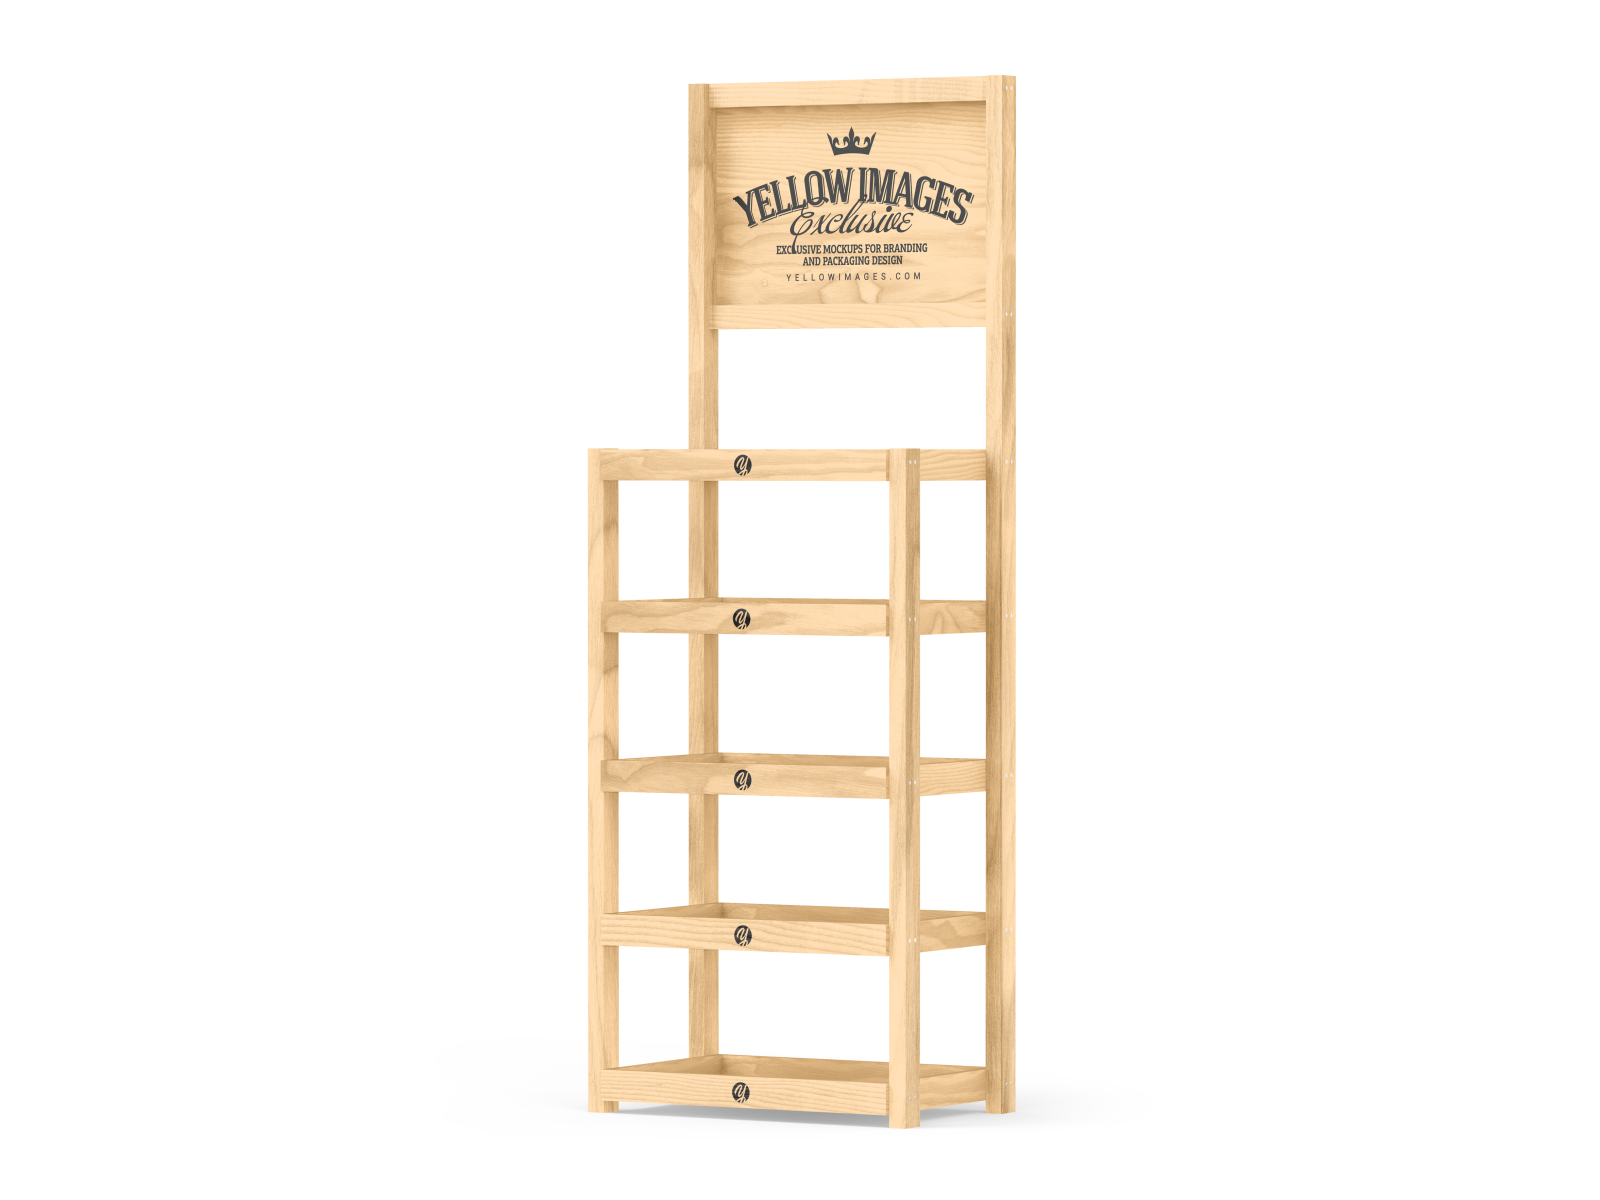 Download Wooden Display Stand Mockup By Vadim On Dribbble Yellowimages Mockups